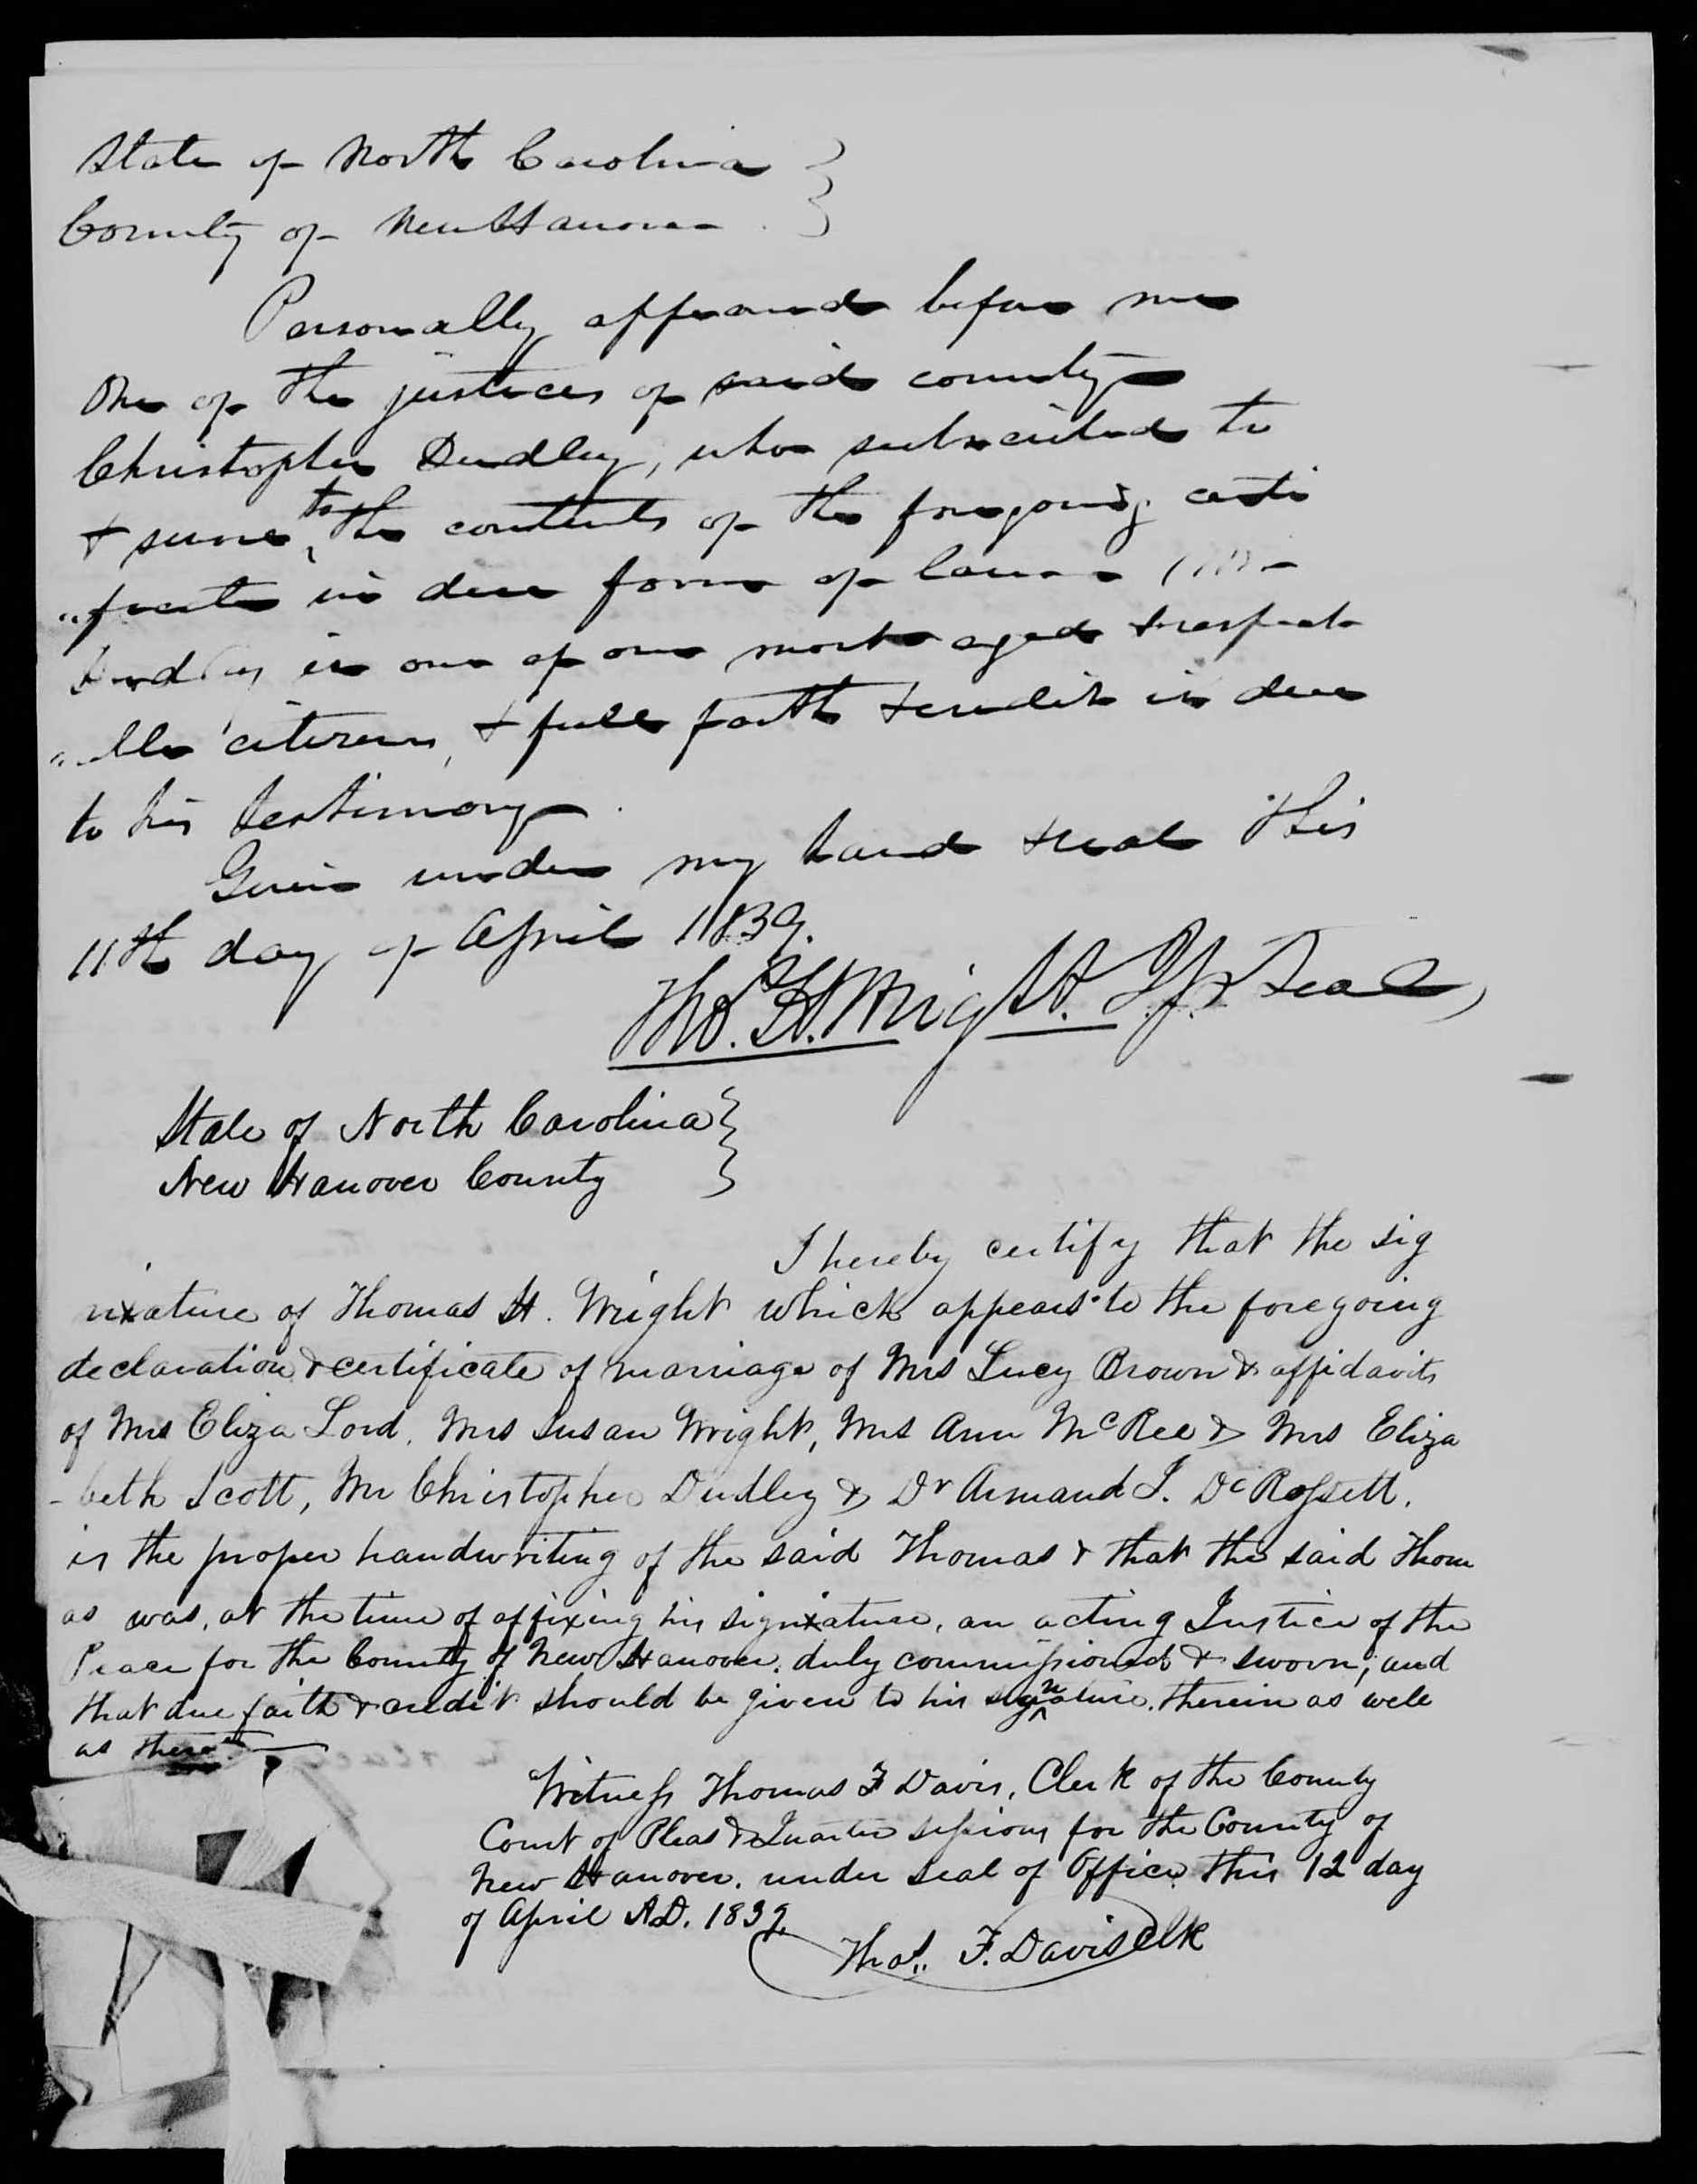 Affidavit of Christopher Dudley in support of a Pension Claim for Lucy Brown, 11 April 1839, page 2